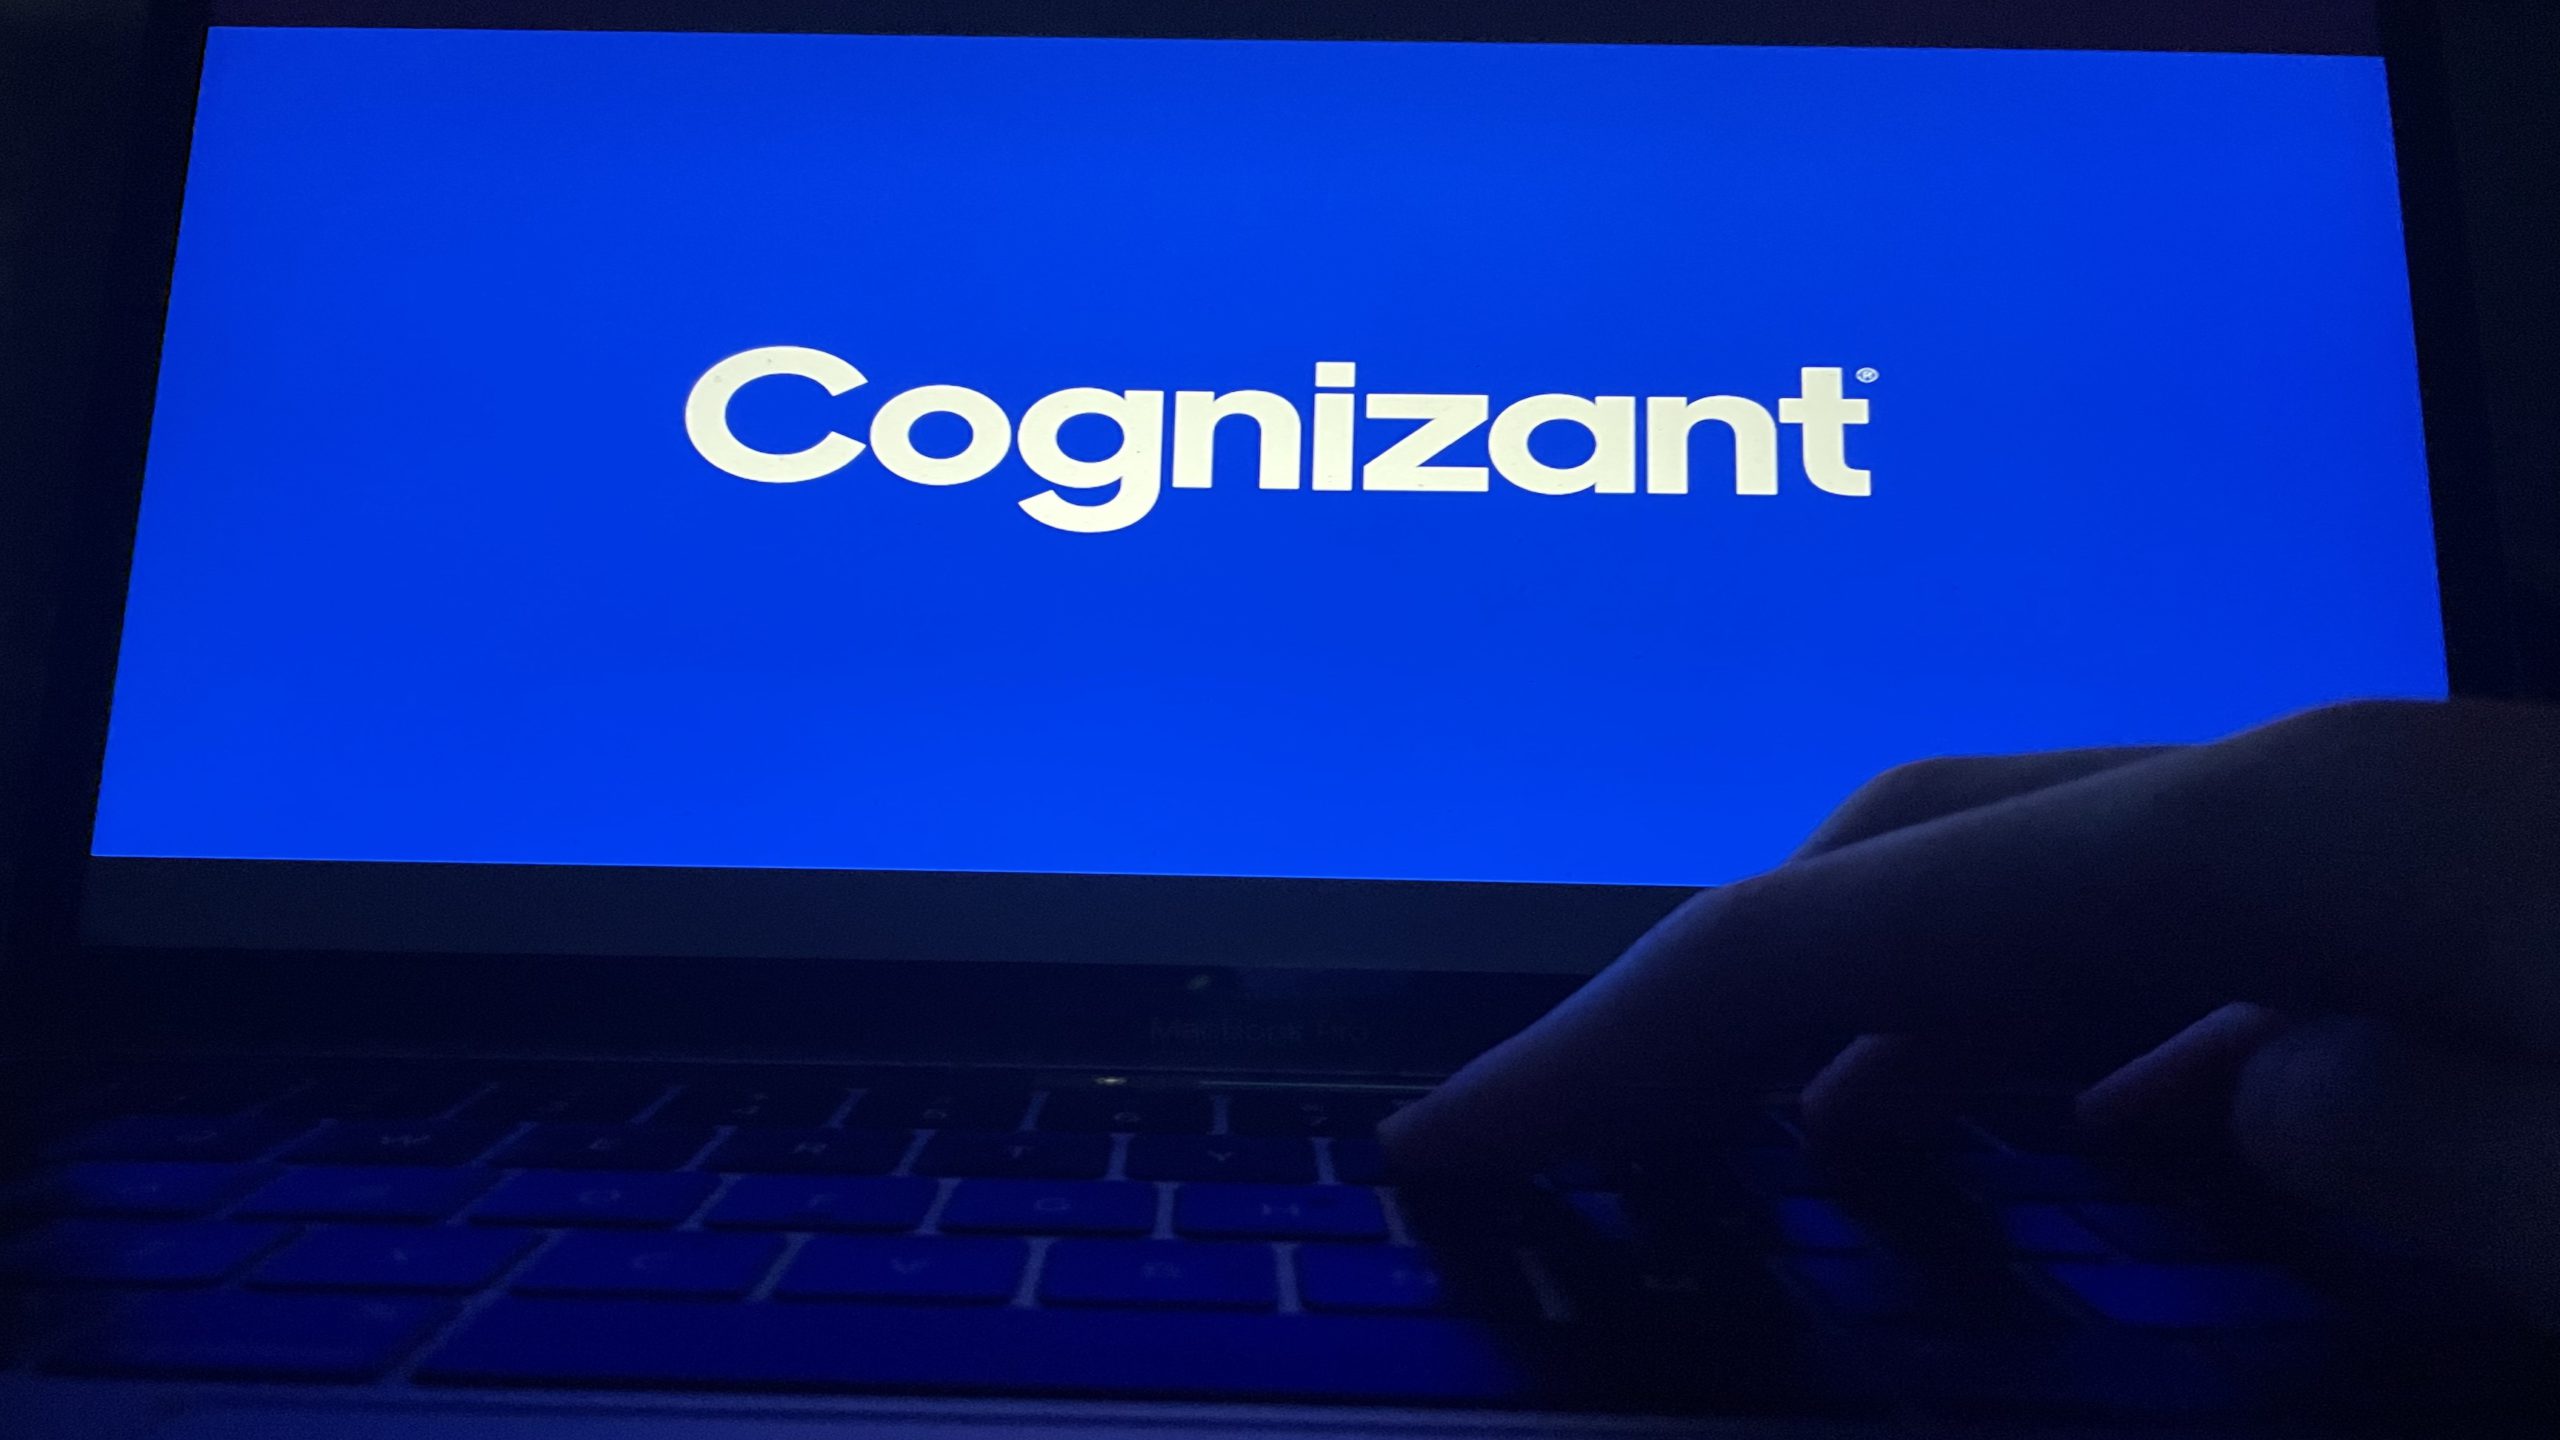 Bathed in blue light, a hand works on a laptop glowing with the Cognizant logo